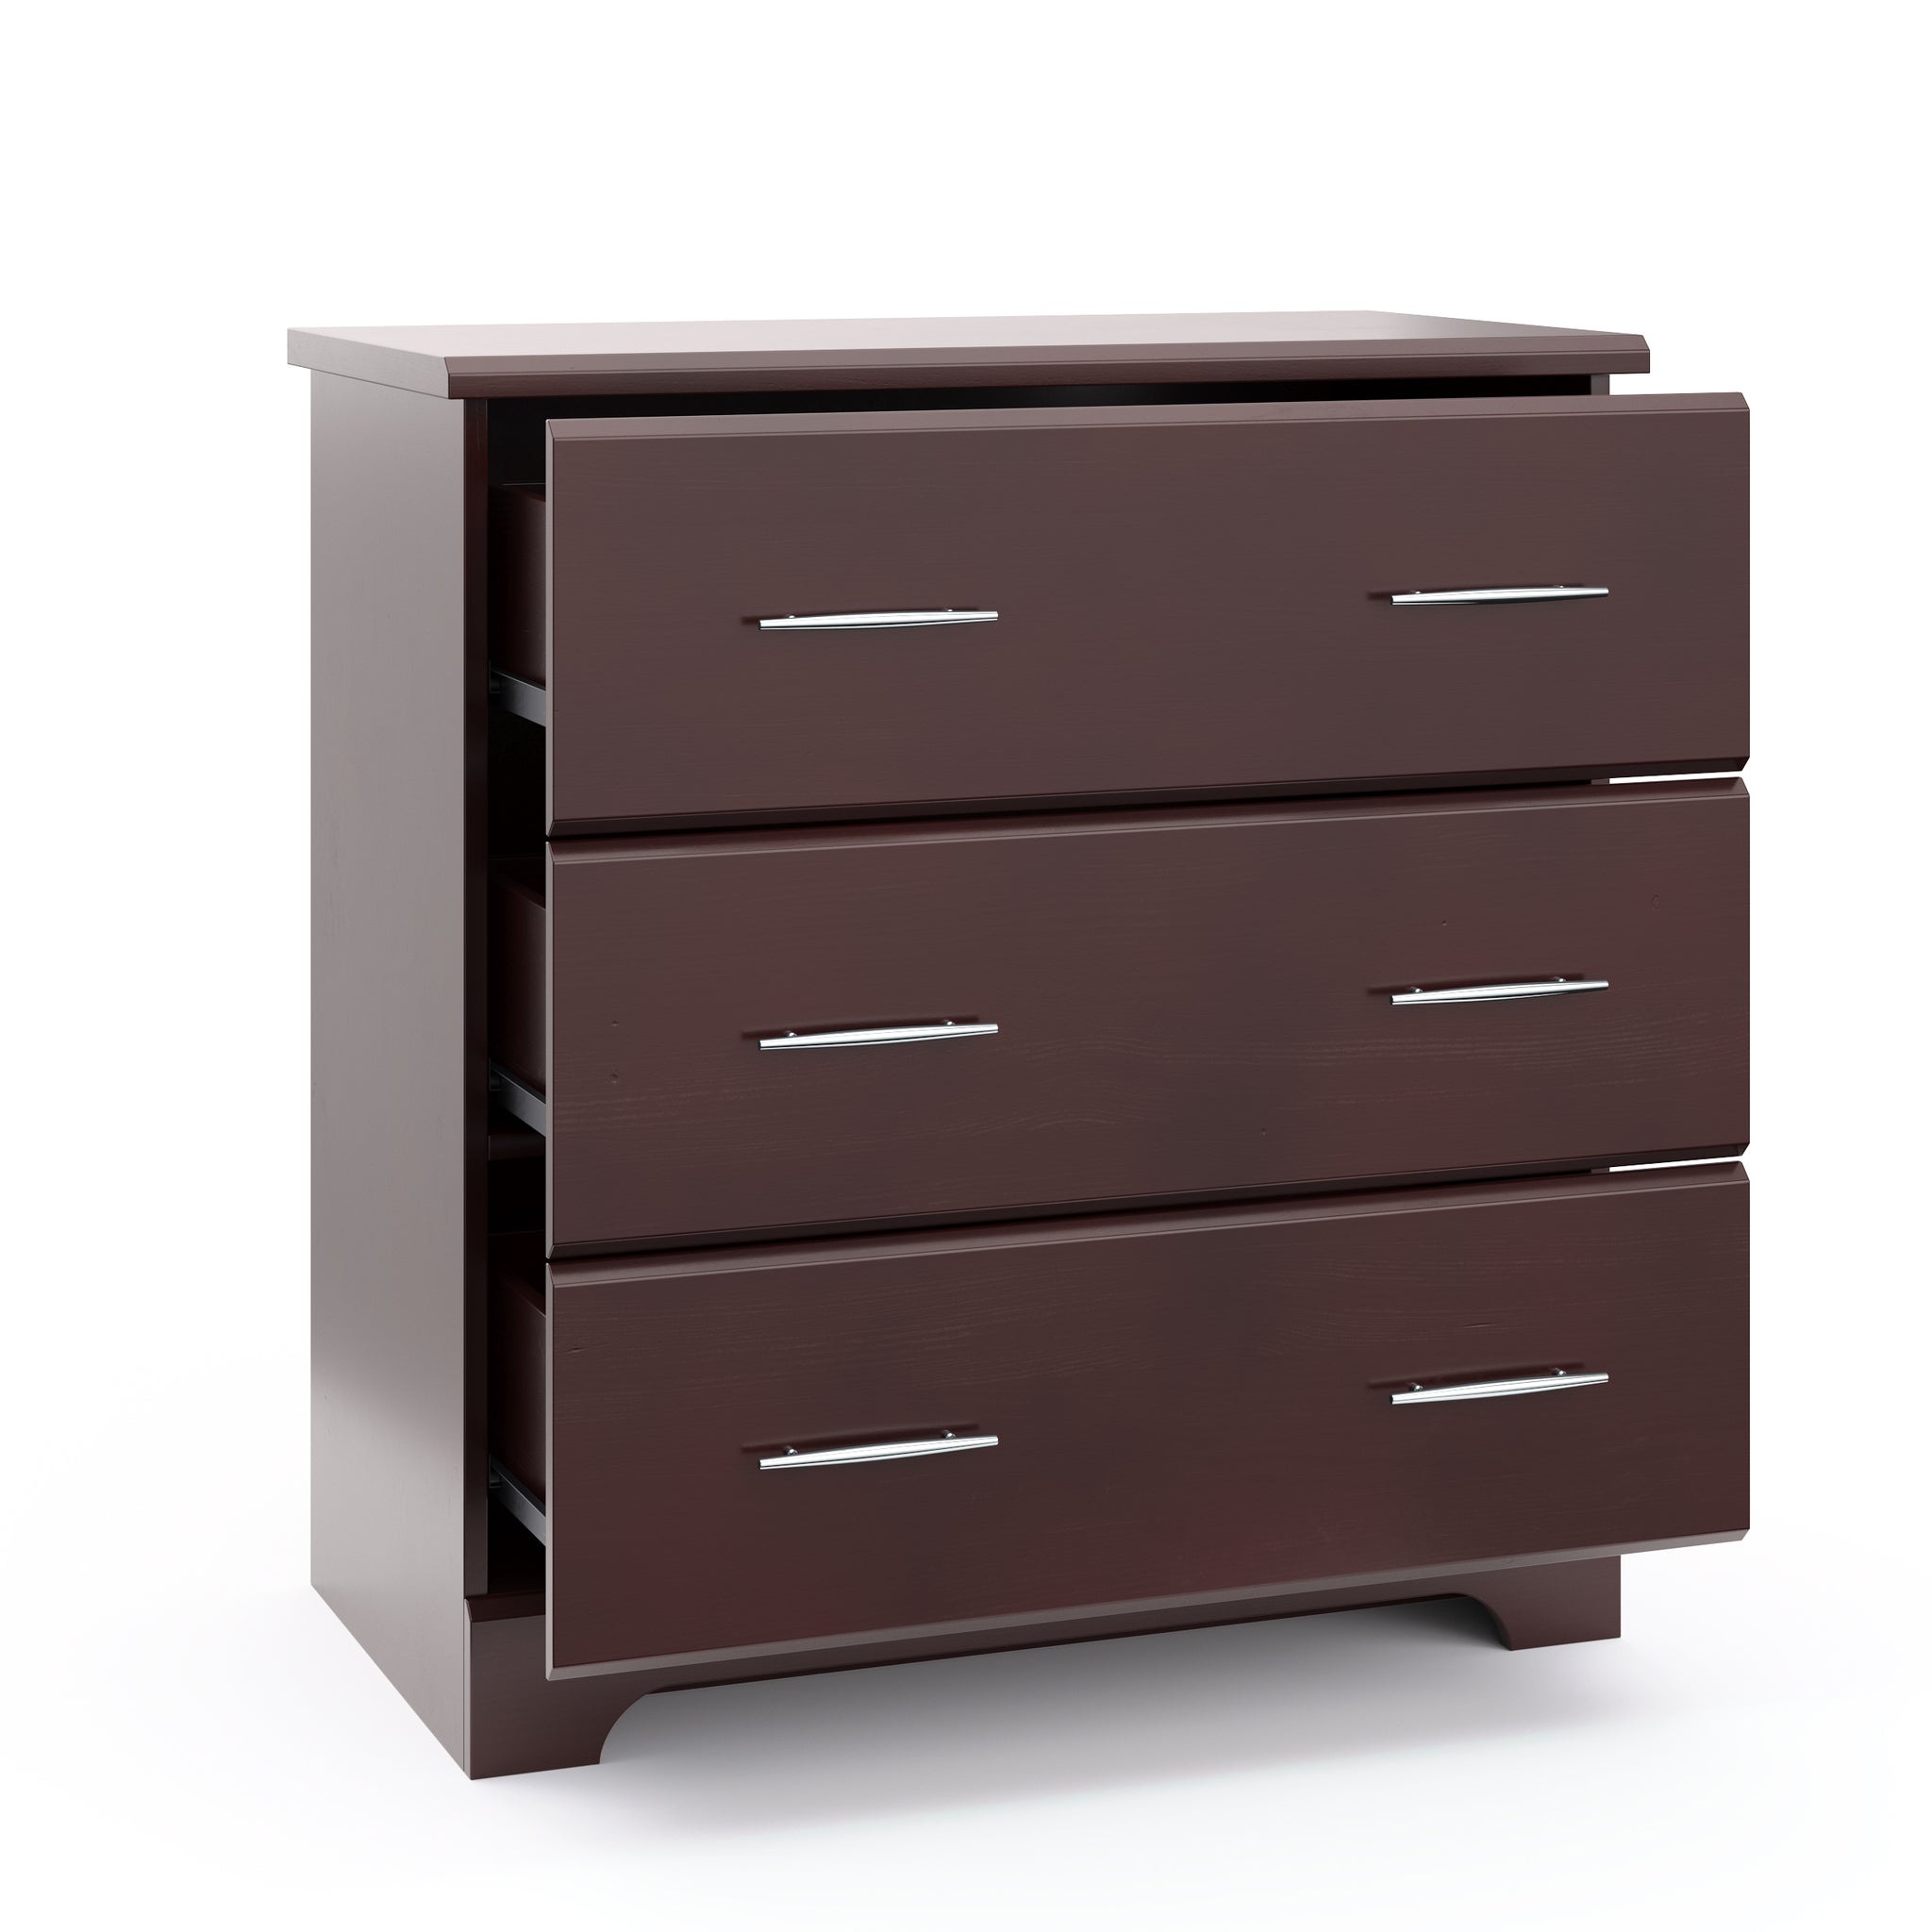 espresso 3 drawer chest with 3 open drawers